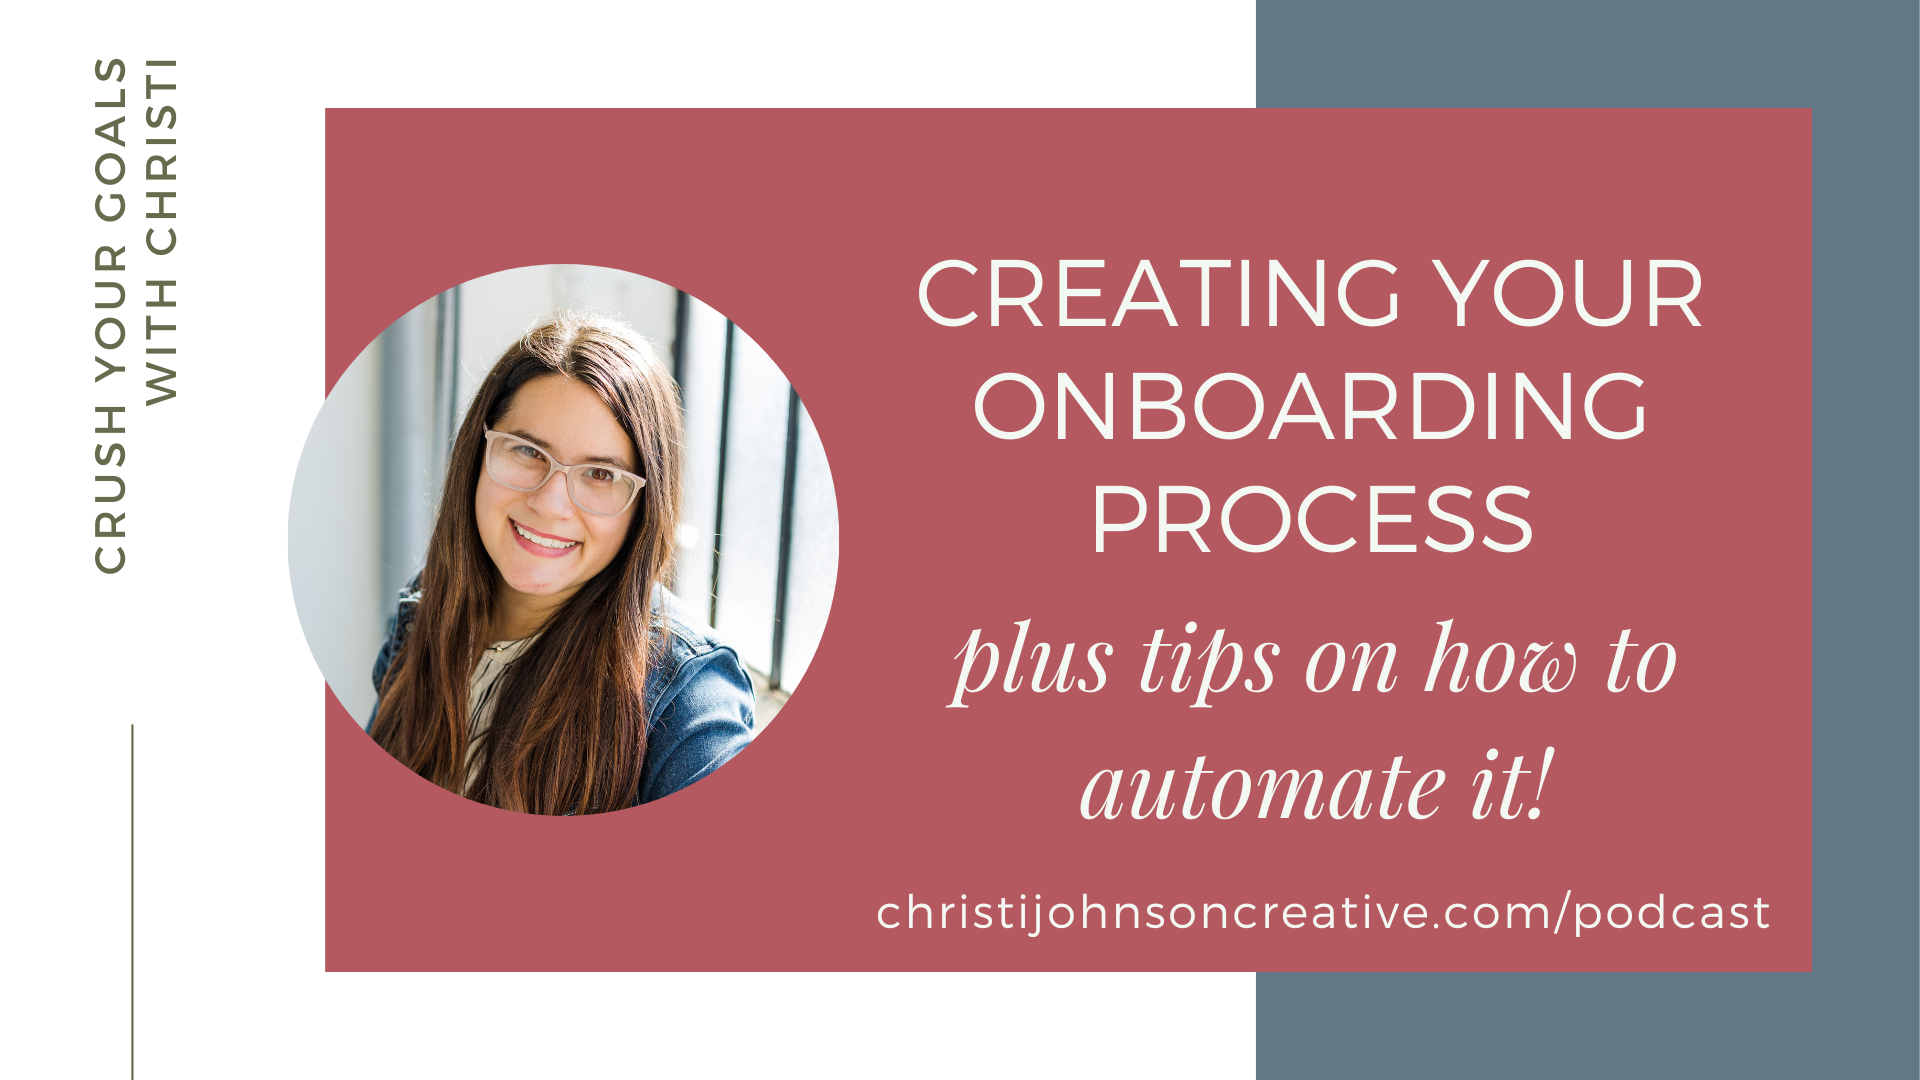 Creating your Onboarding Process is written in white text on a pink background. There is a picture of Christi smiling at the camera wearing a denim jacket and pink glasses.